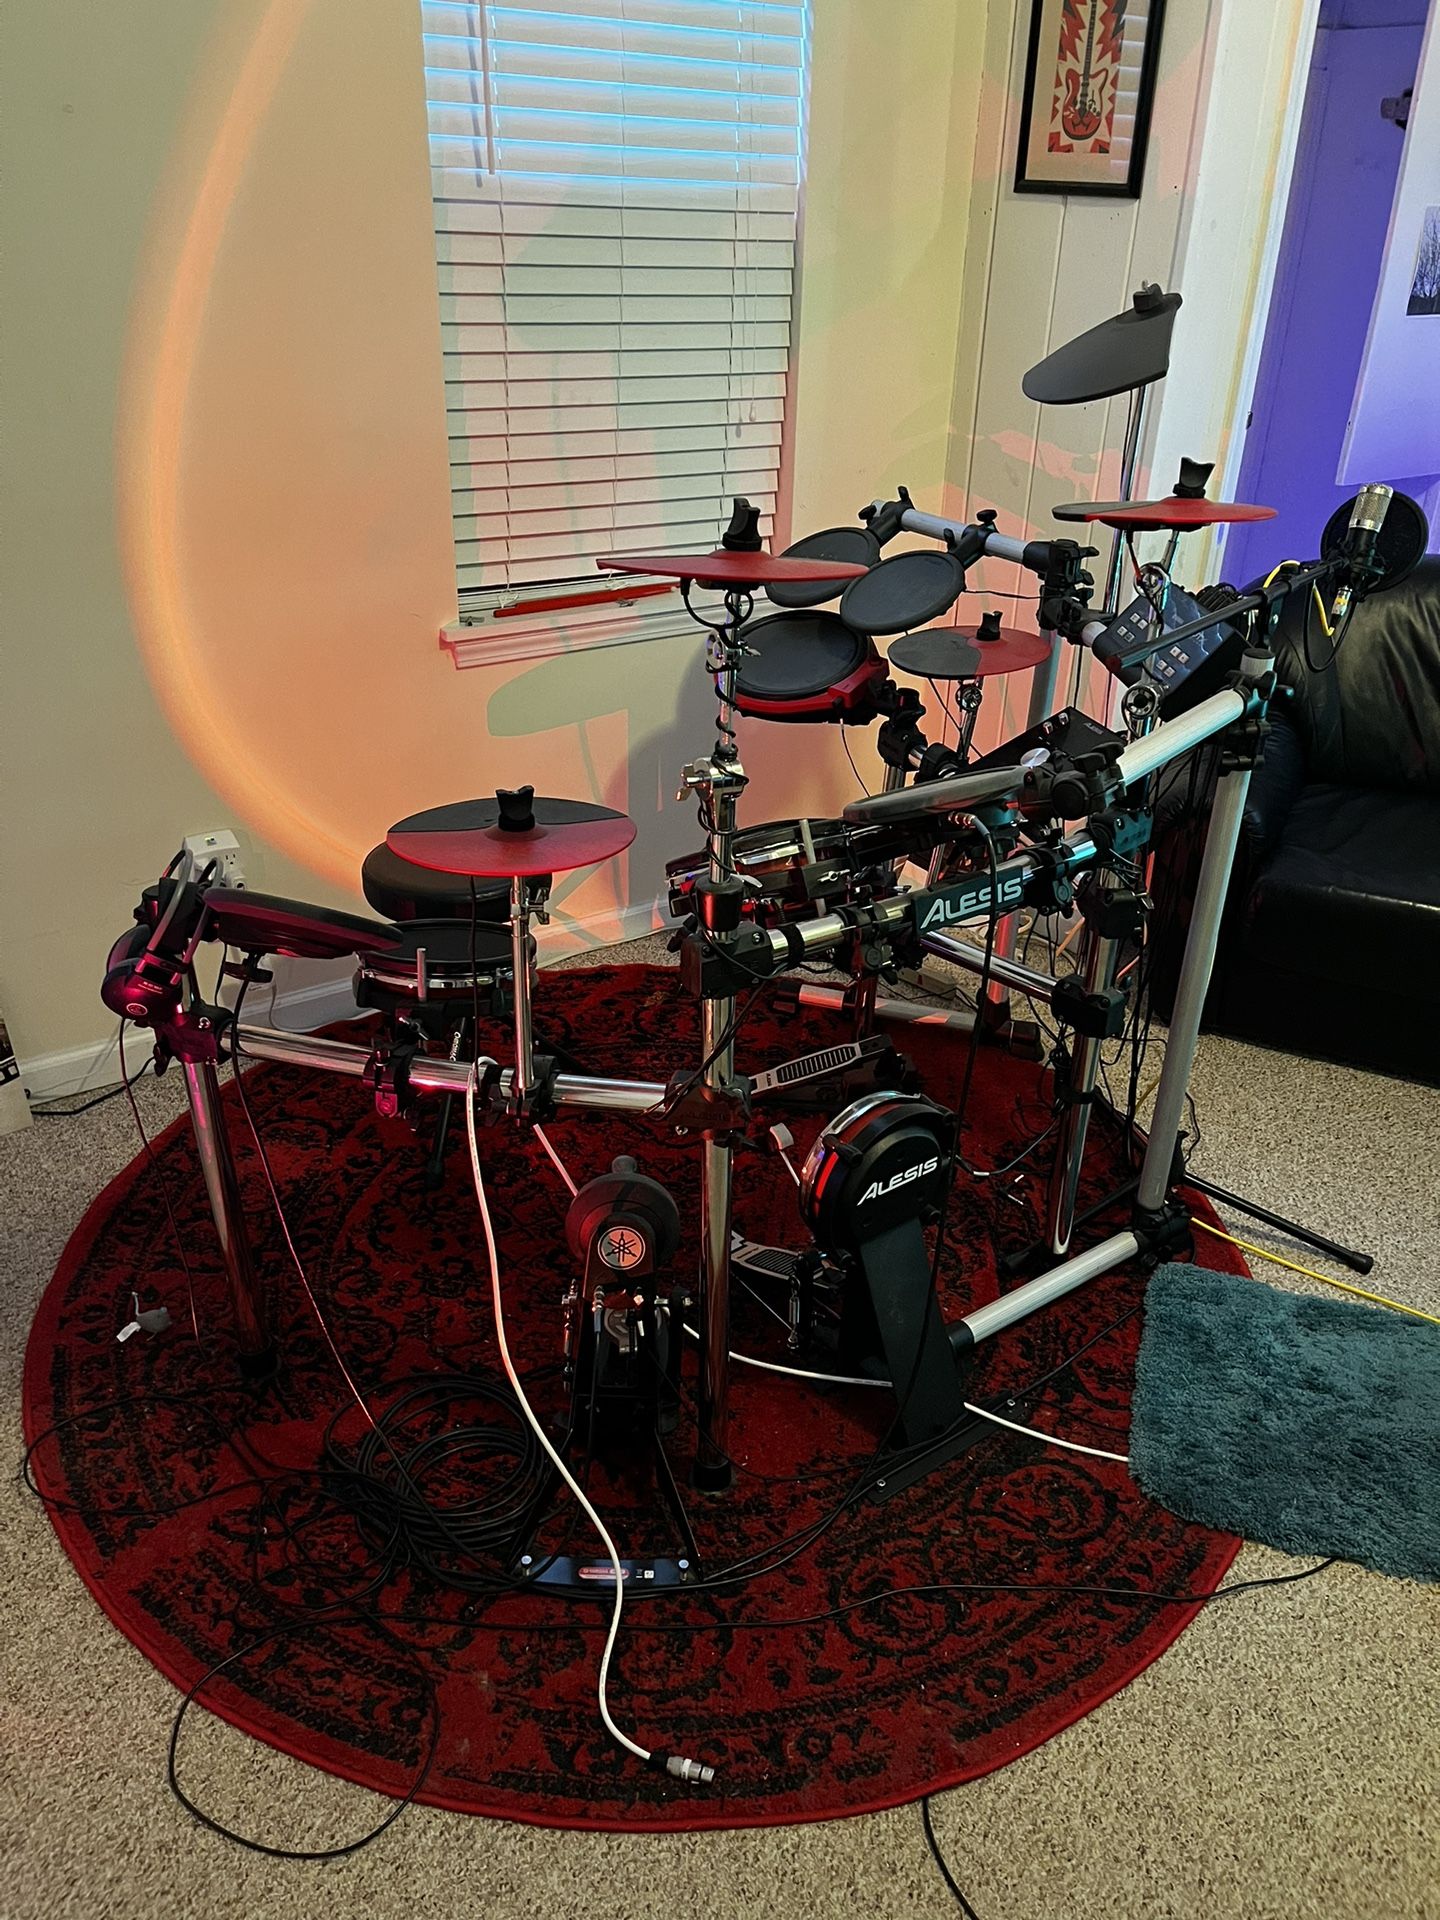 Electronic Drum Sets